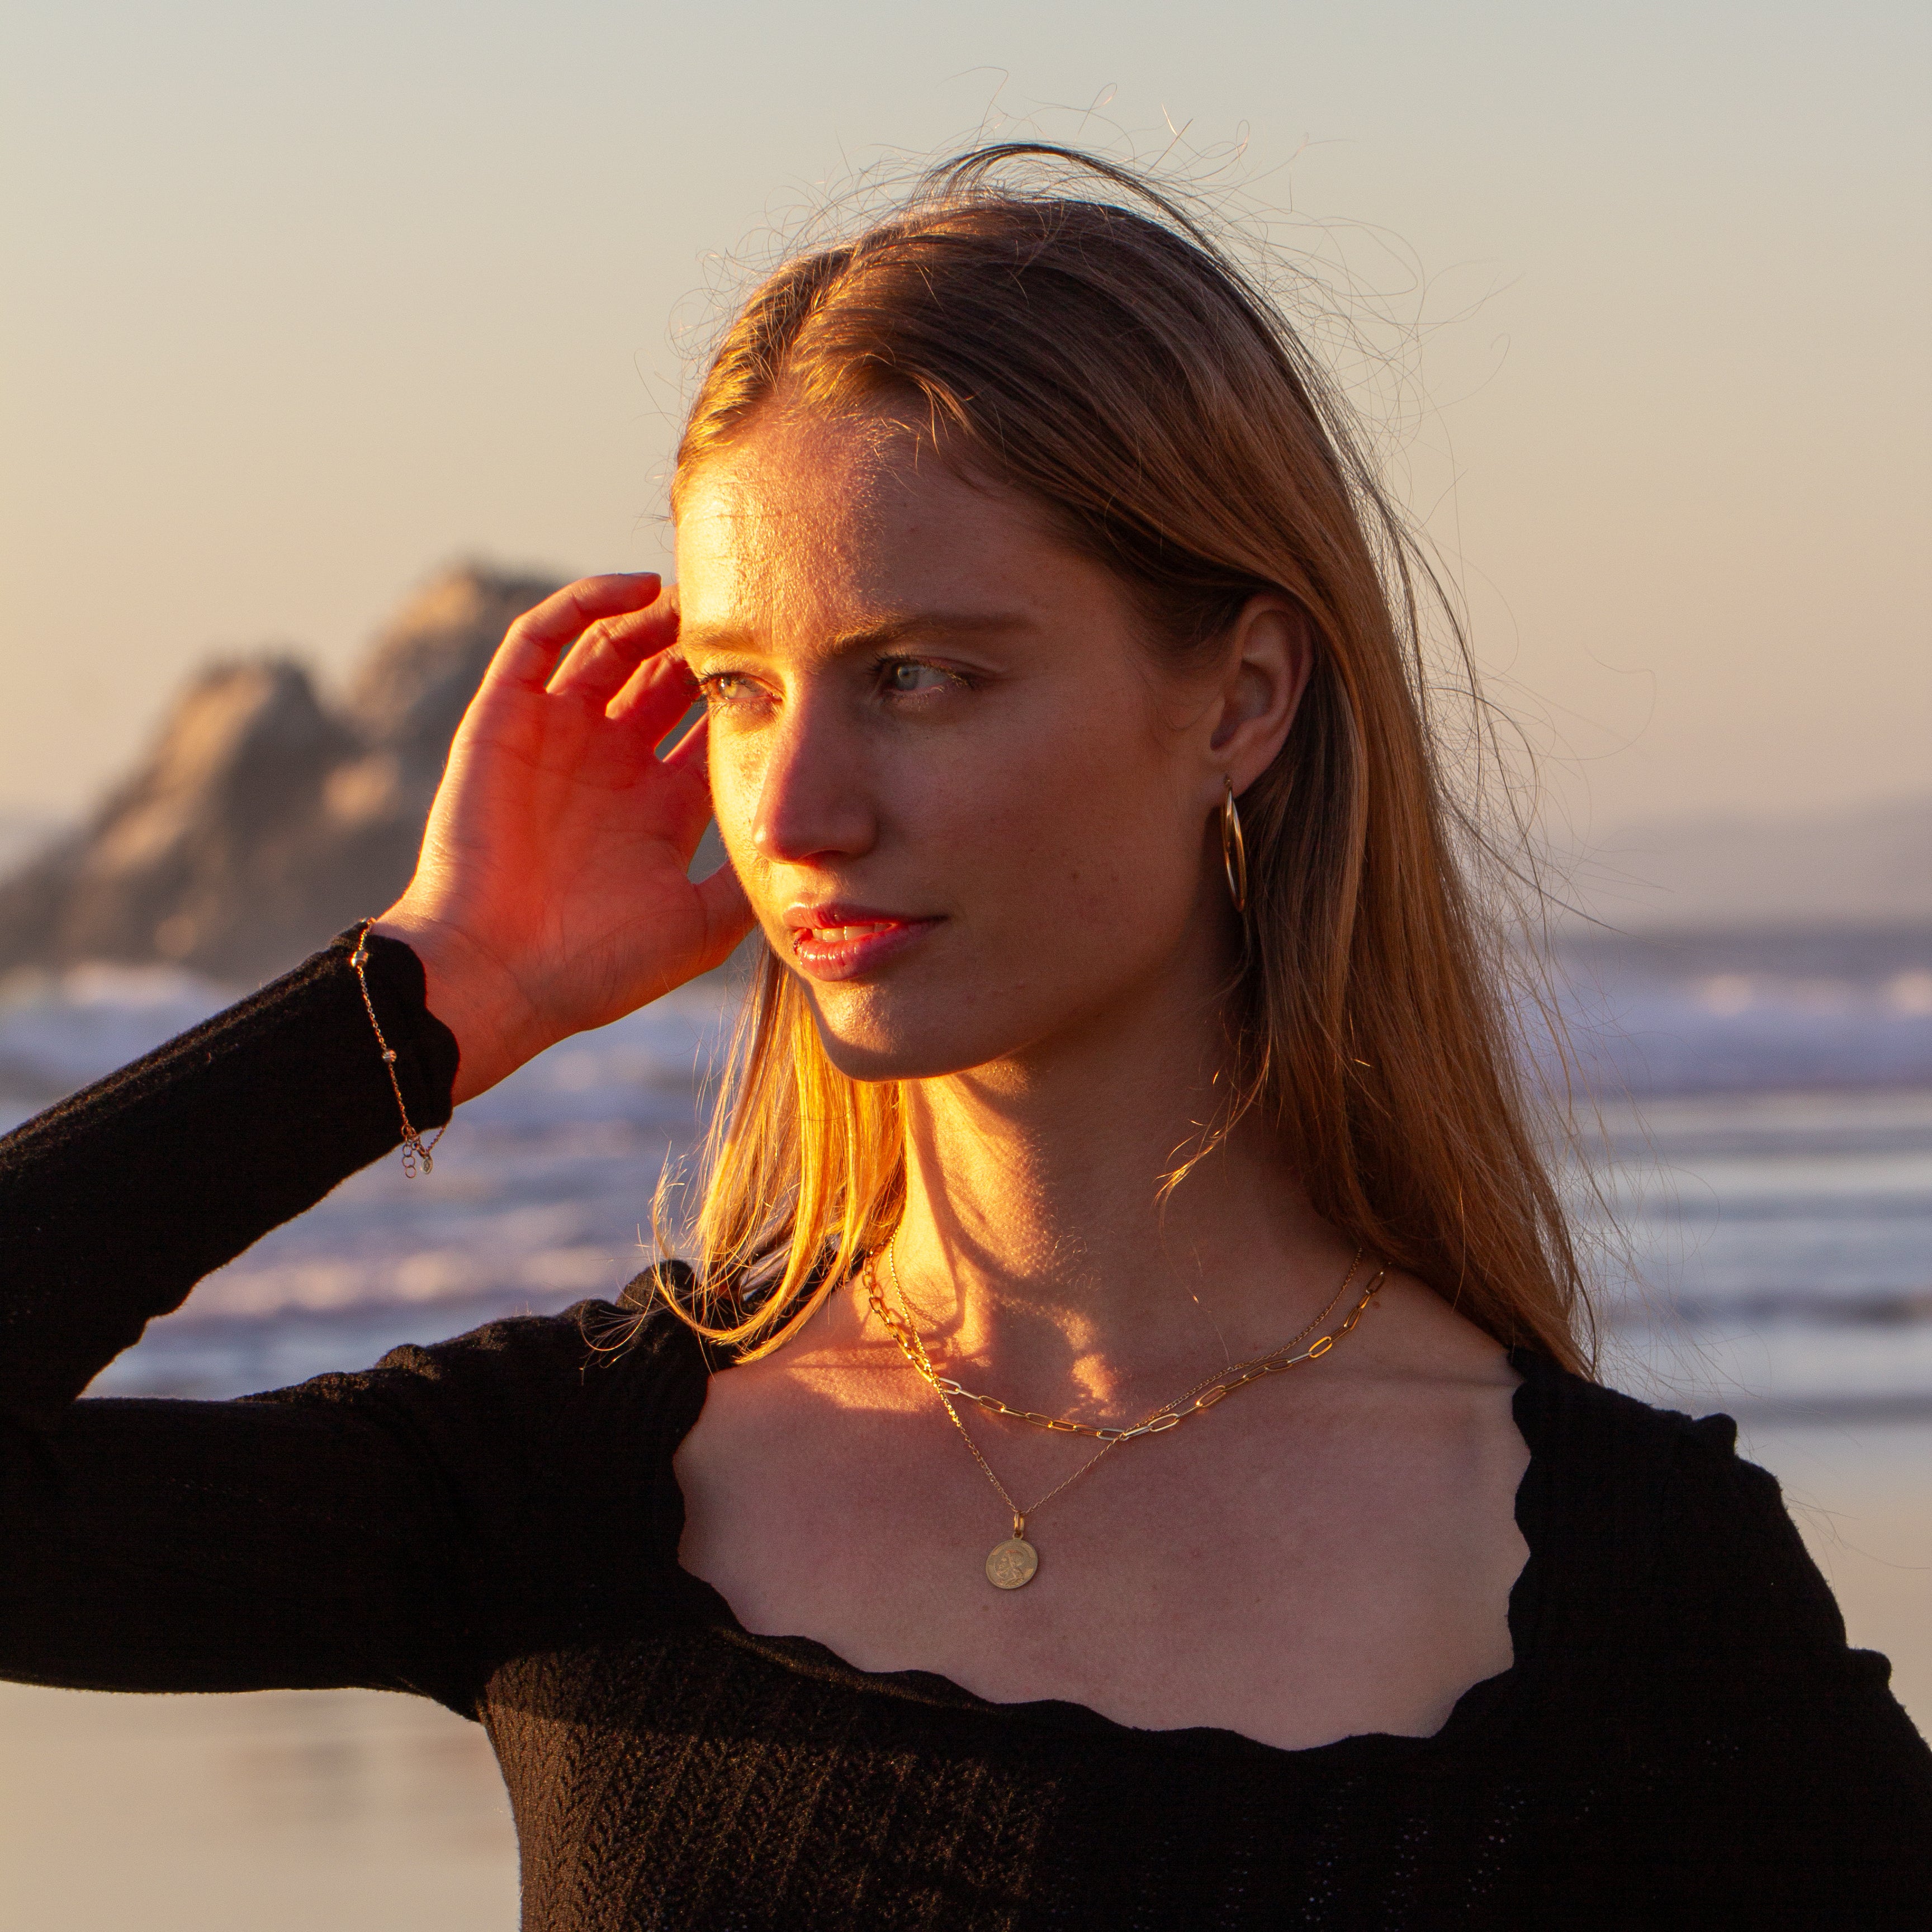 Gold Coin Necklace Pendant Women, on model, beach